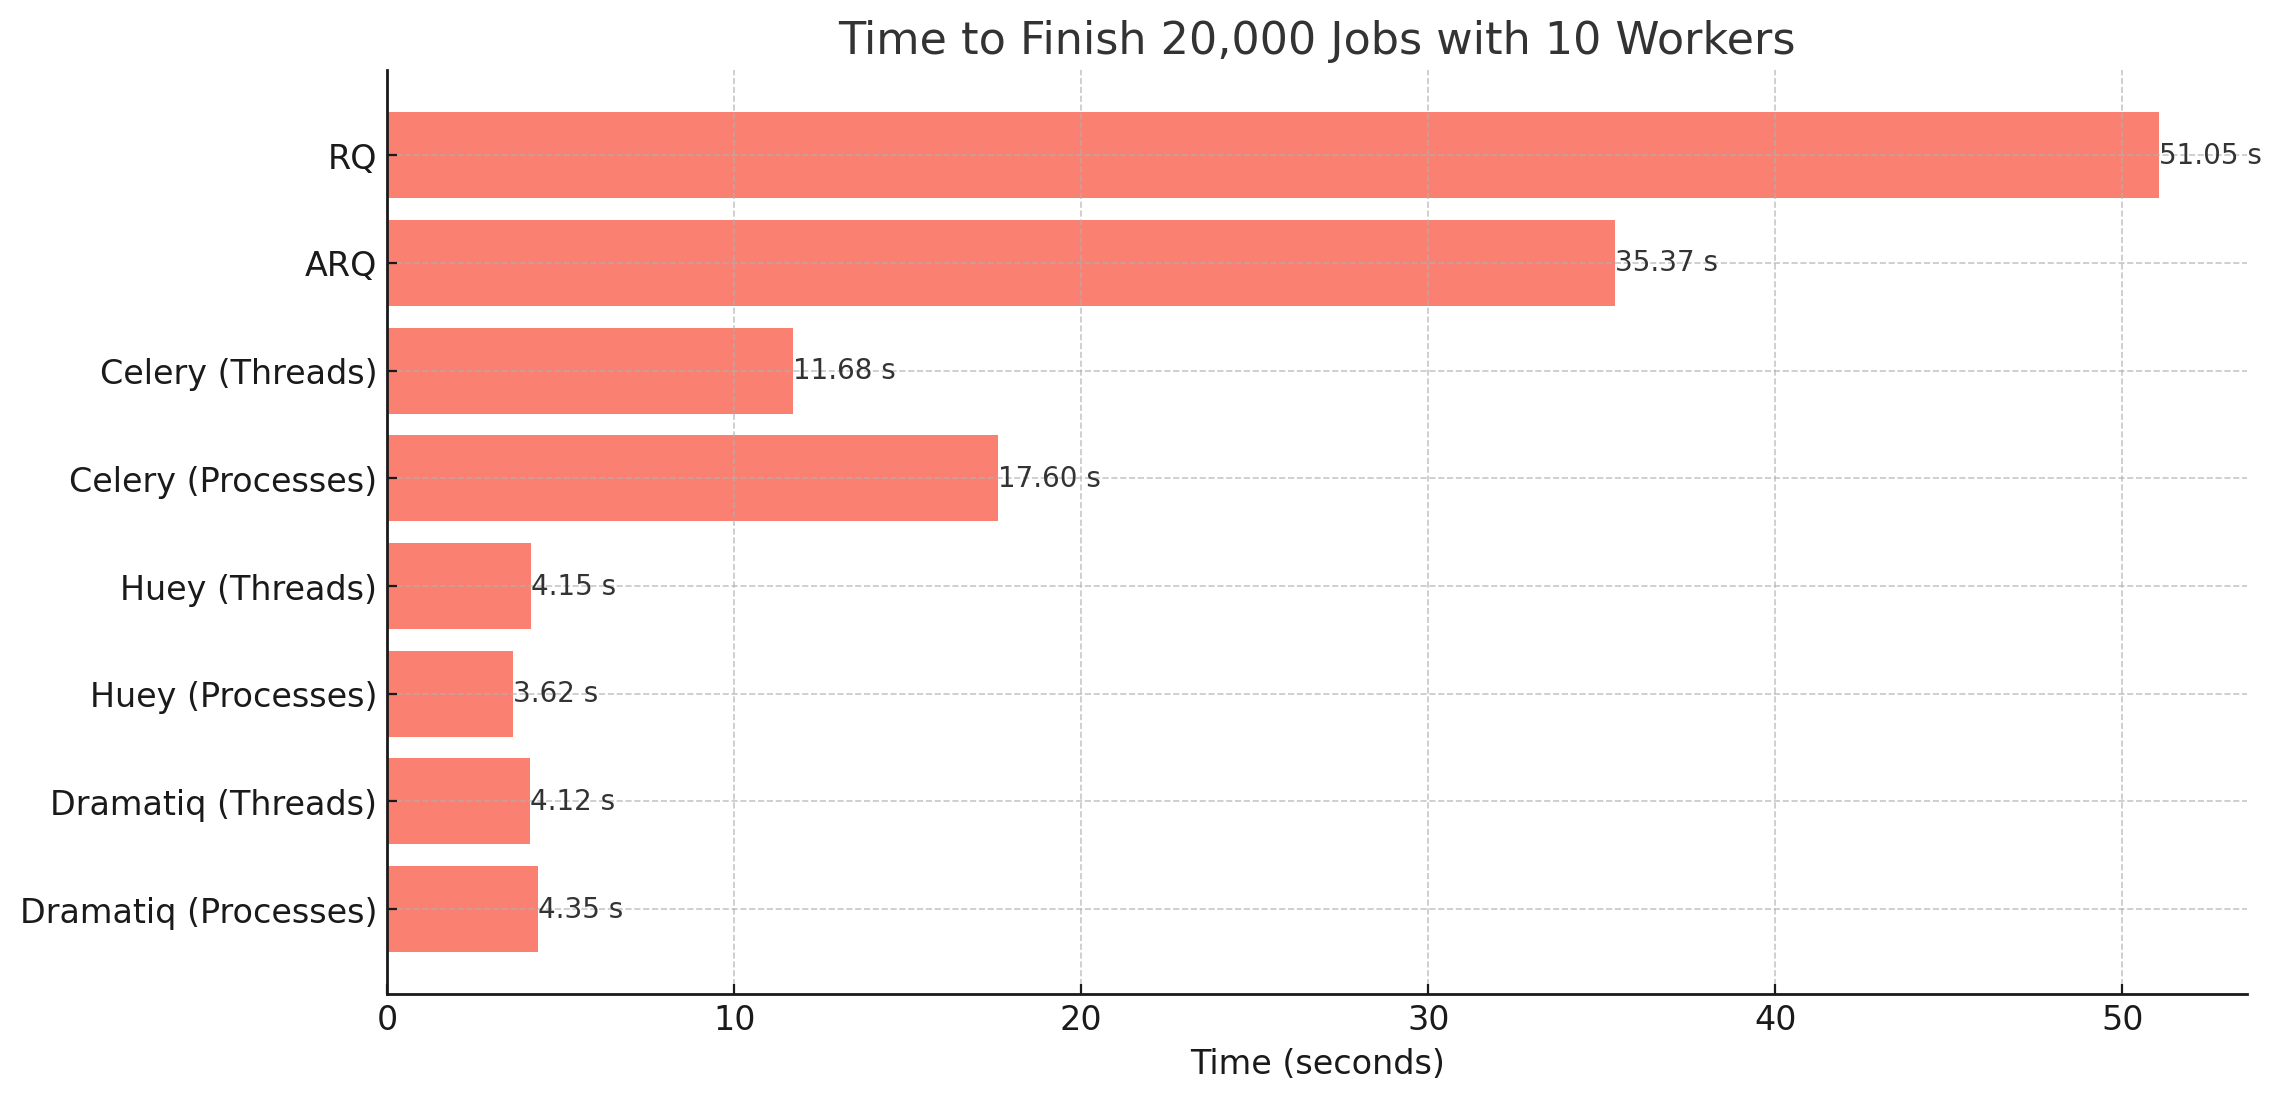 Total Time Spent on Processing 20,000 Jobs with 10 Workers